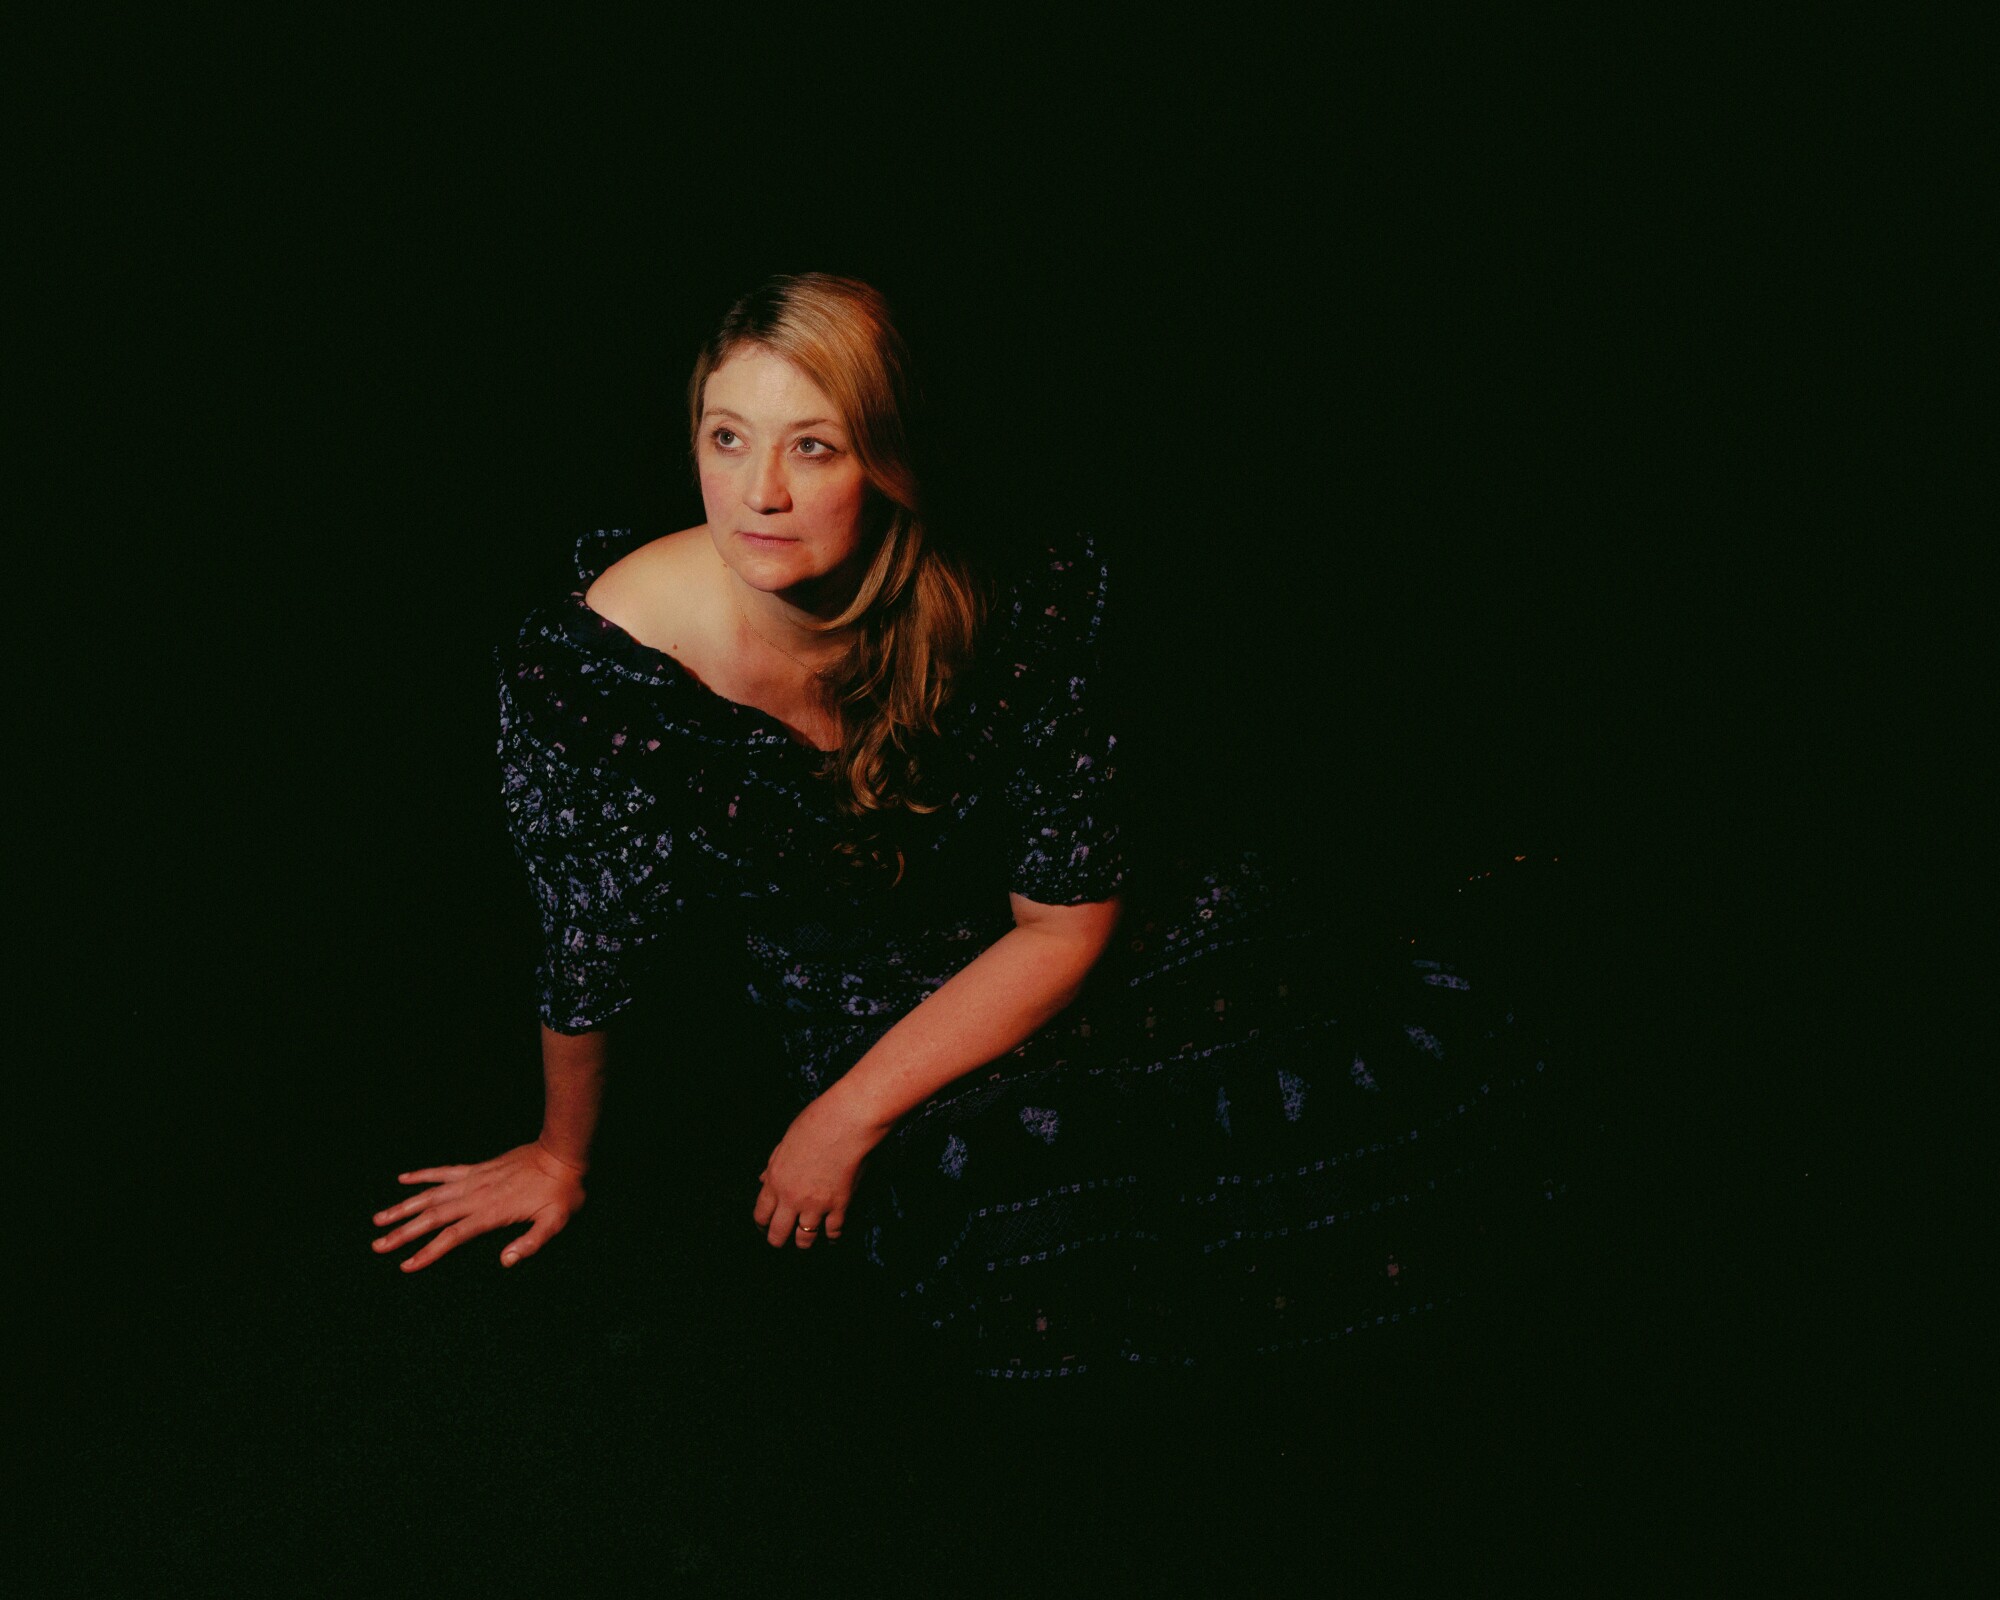 A woman in a dress sits on the ground in darkness.